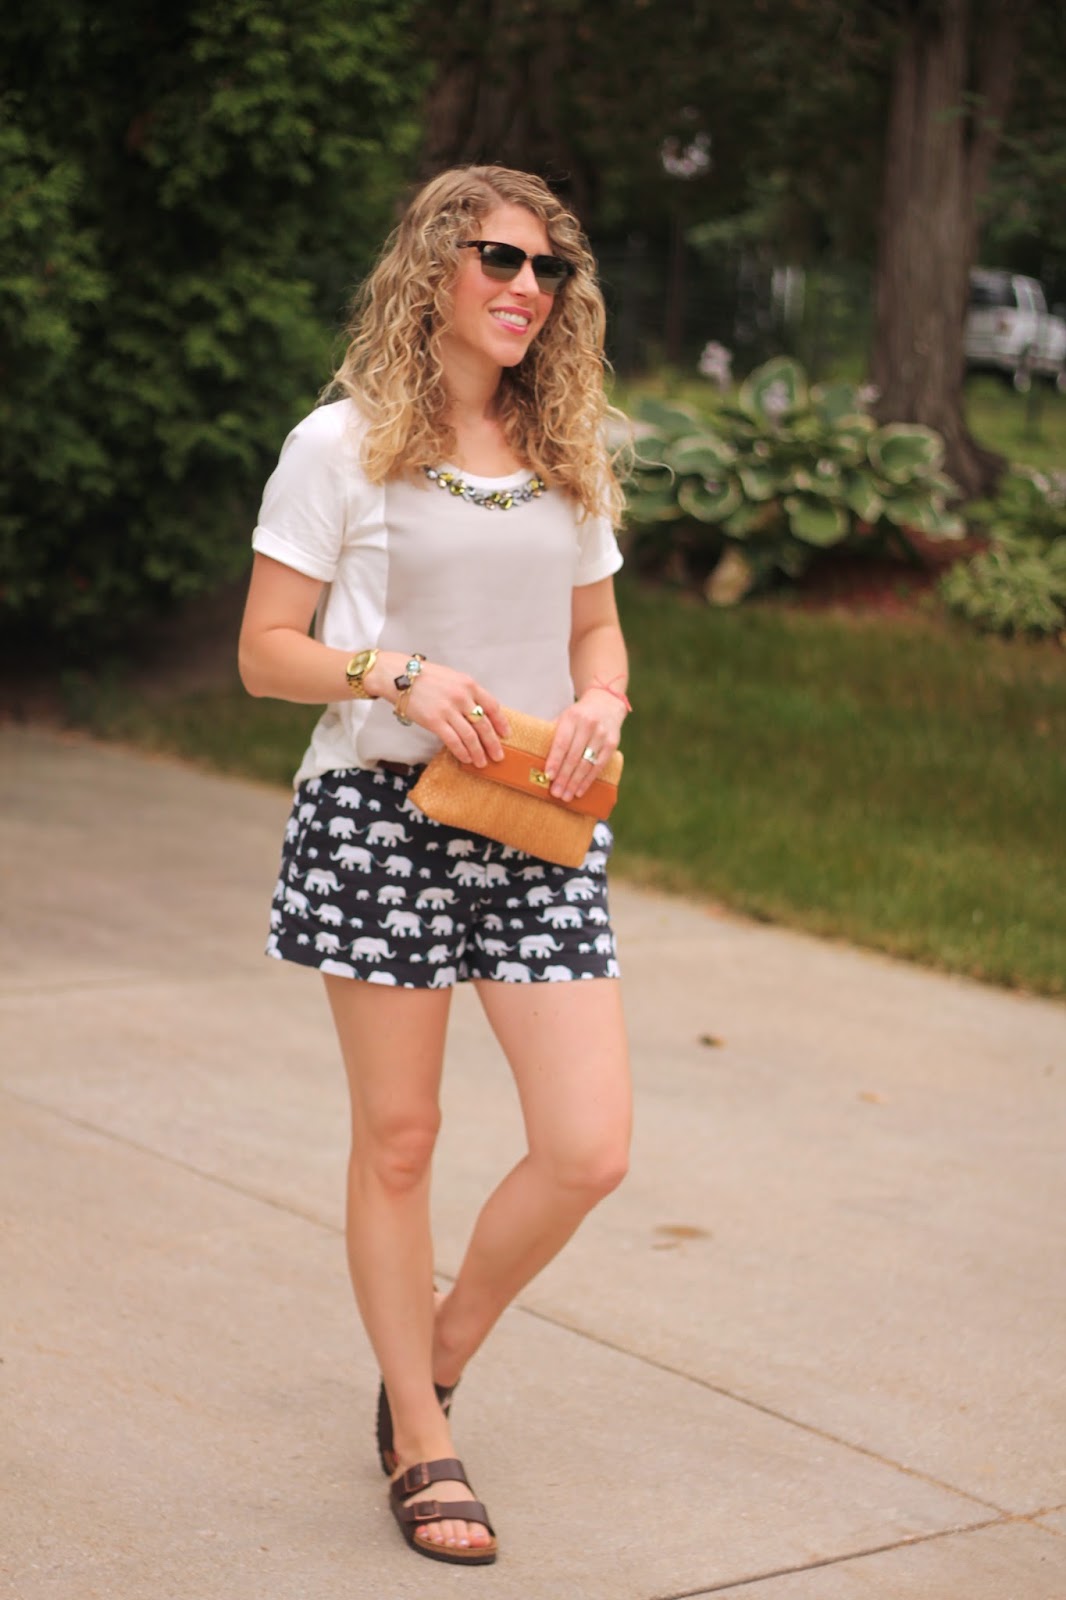 I do deClaire: Elephant Print Shorts and Jeweled Top